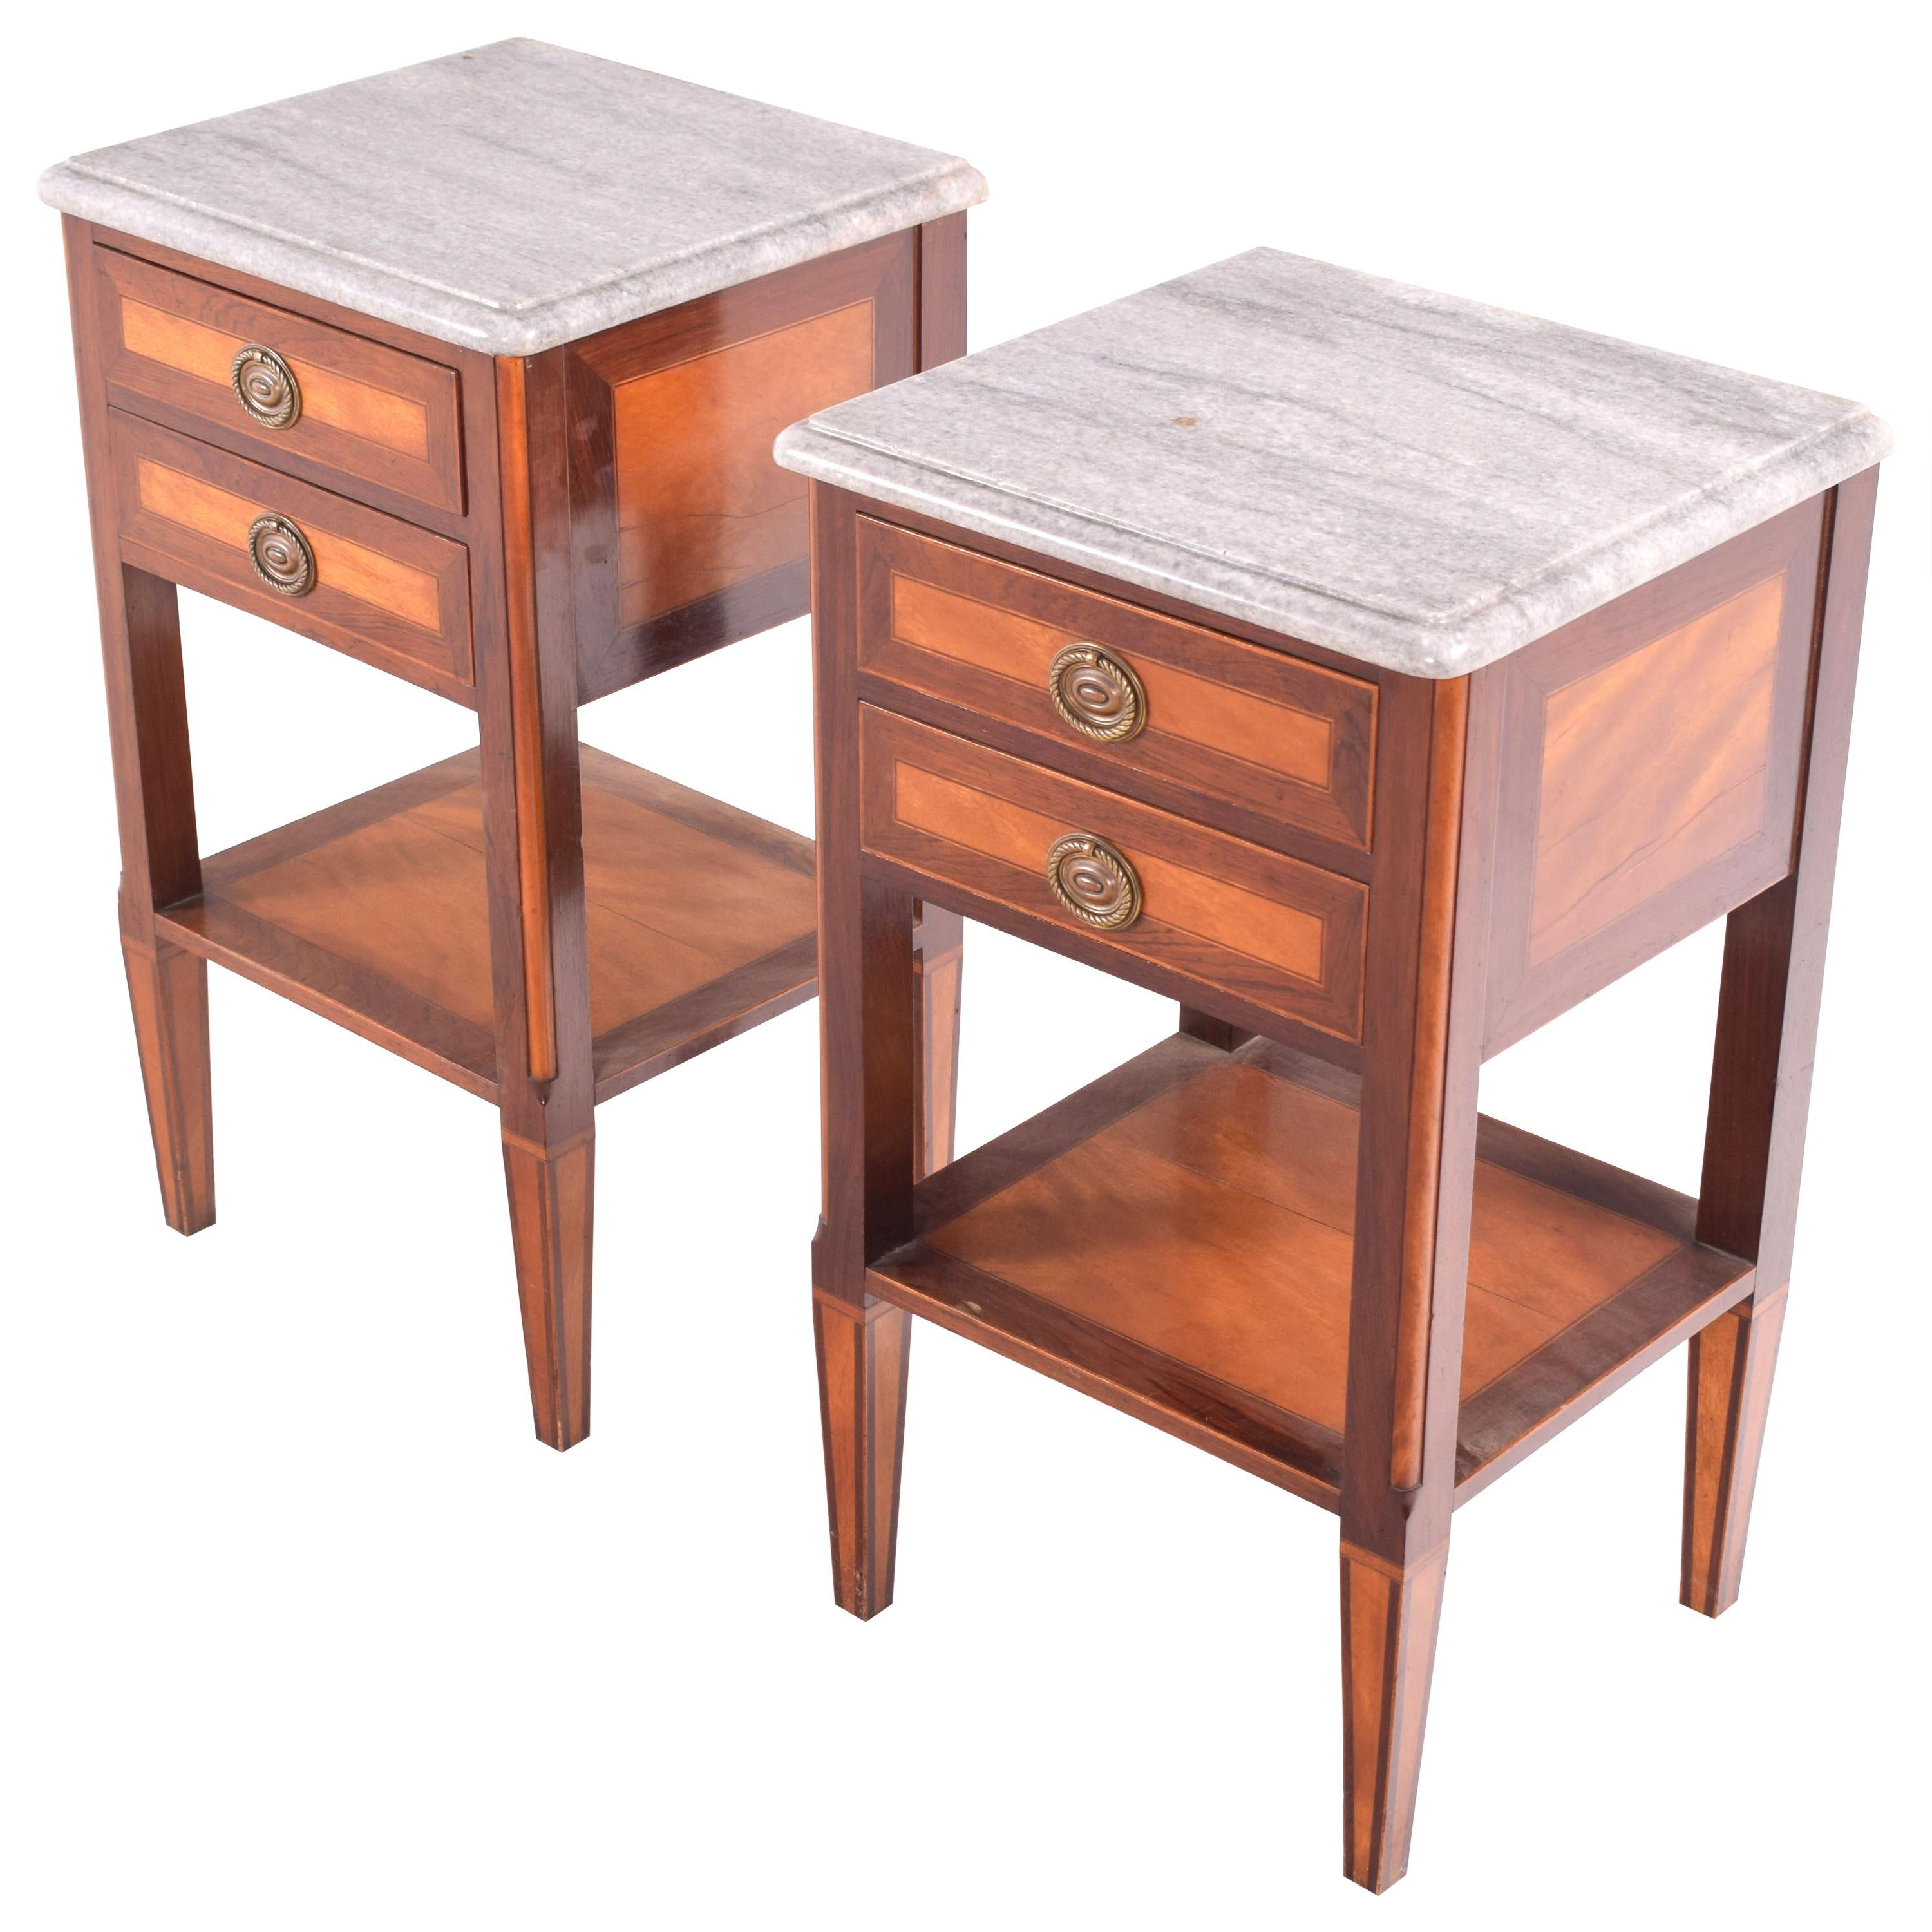 Portuguese Pair of Bedside Tables, D. Maria Style